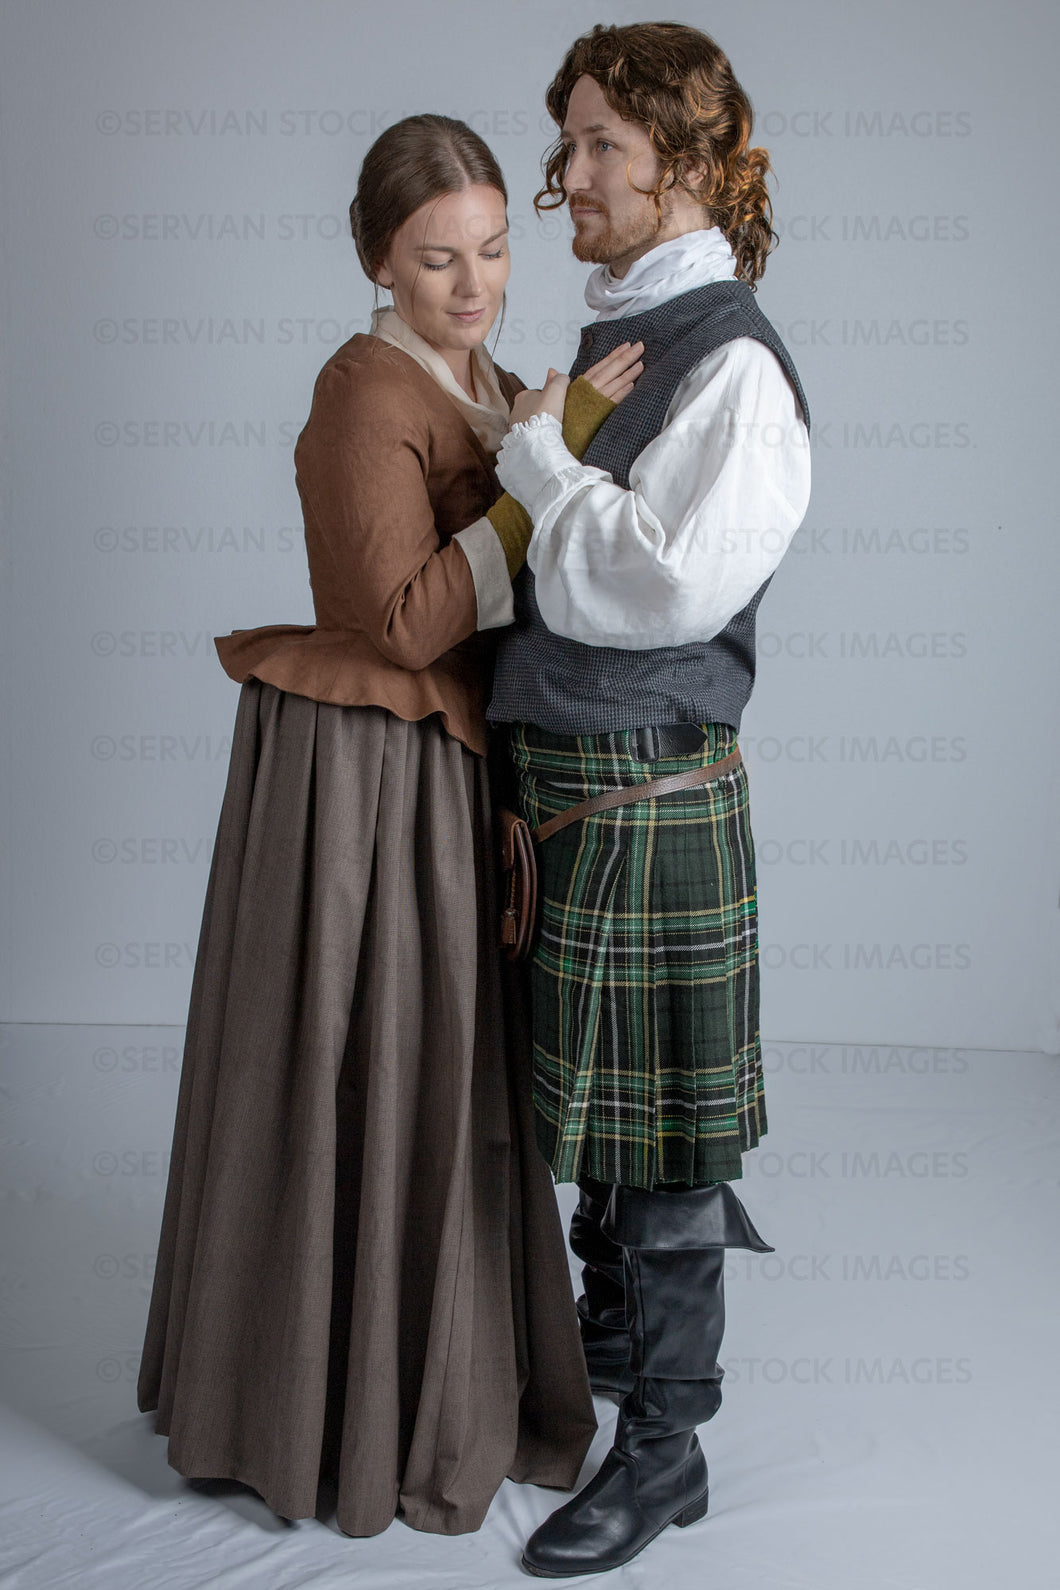 Georgian Scottish couple against a light grey backdrop (Tayla and Aaron 1127)